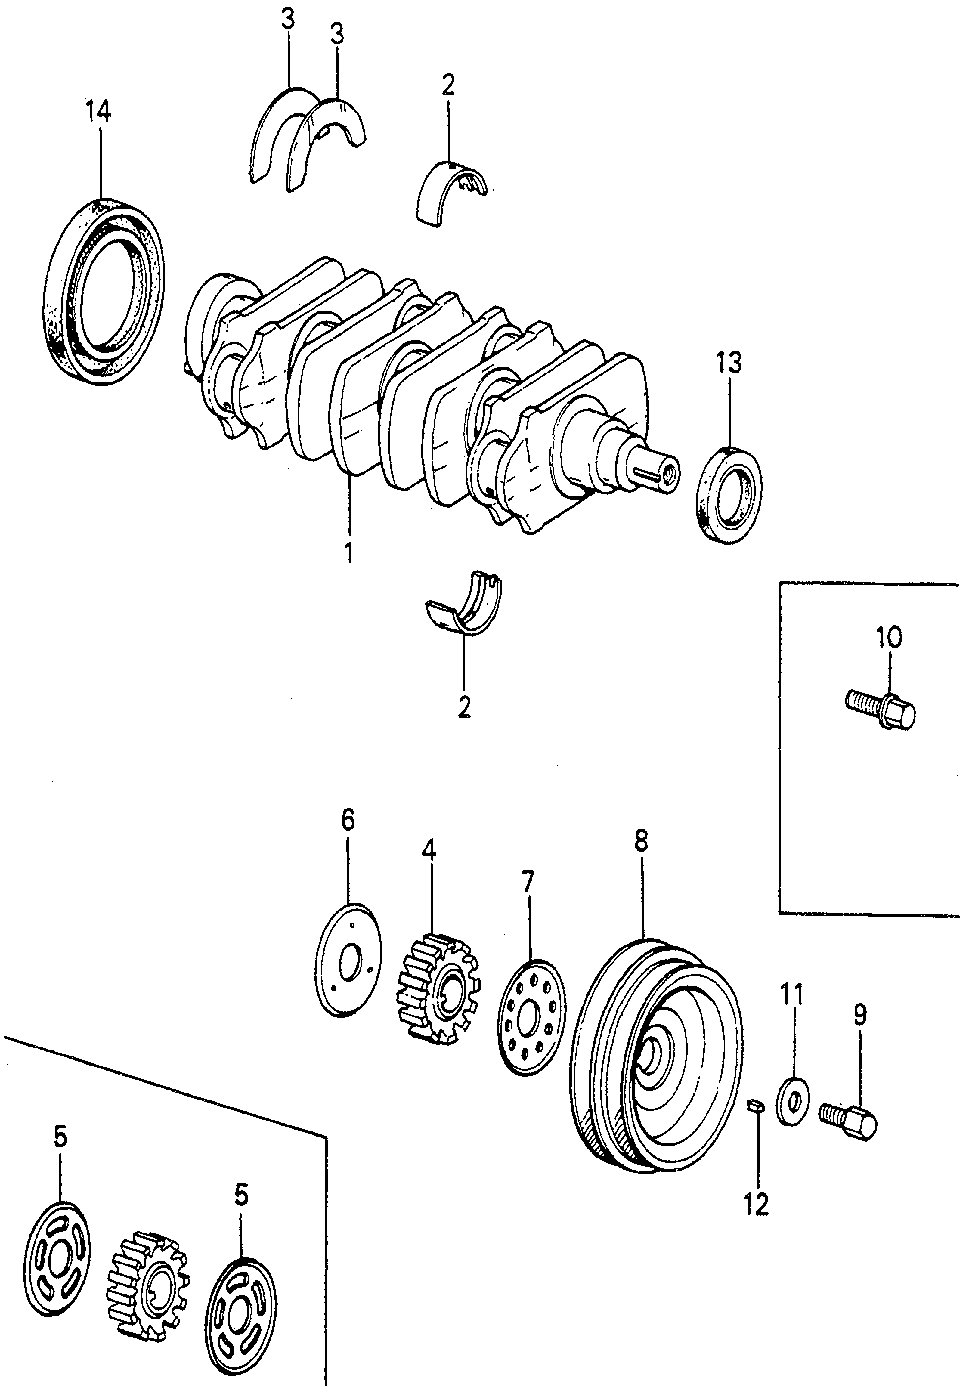 13622-PC1-000 - PLATE, TIMING BELT GUIDE